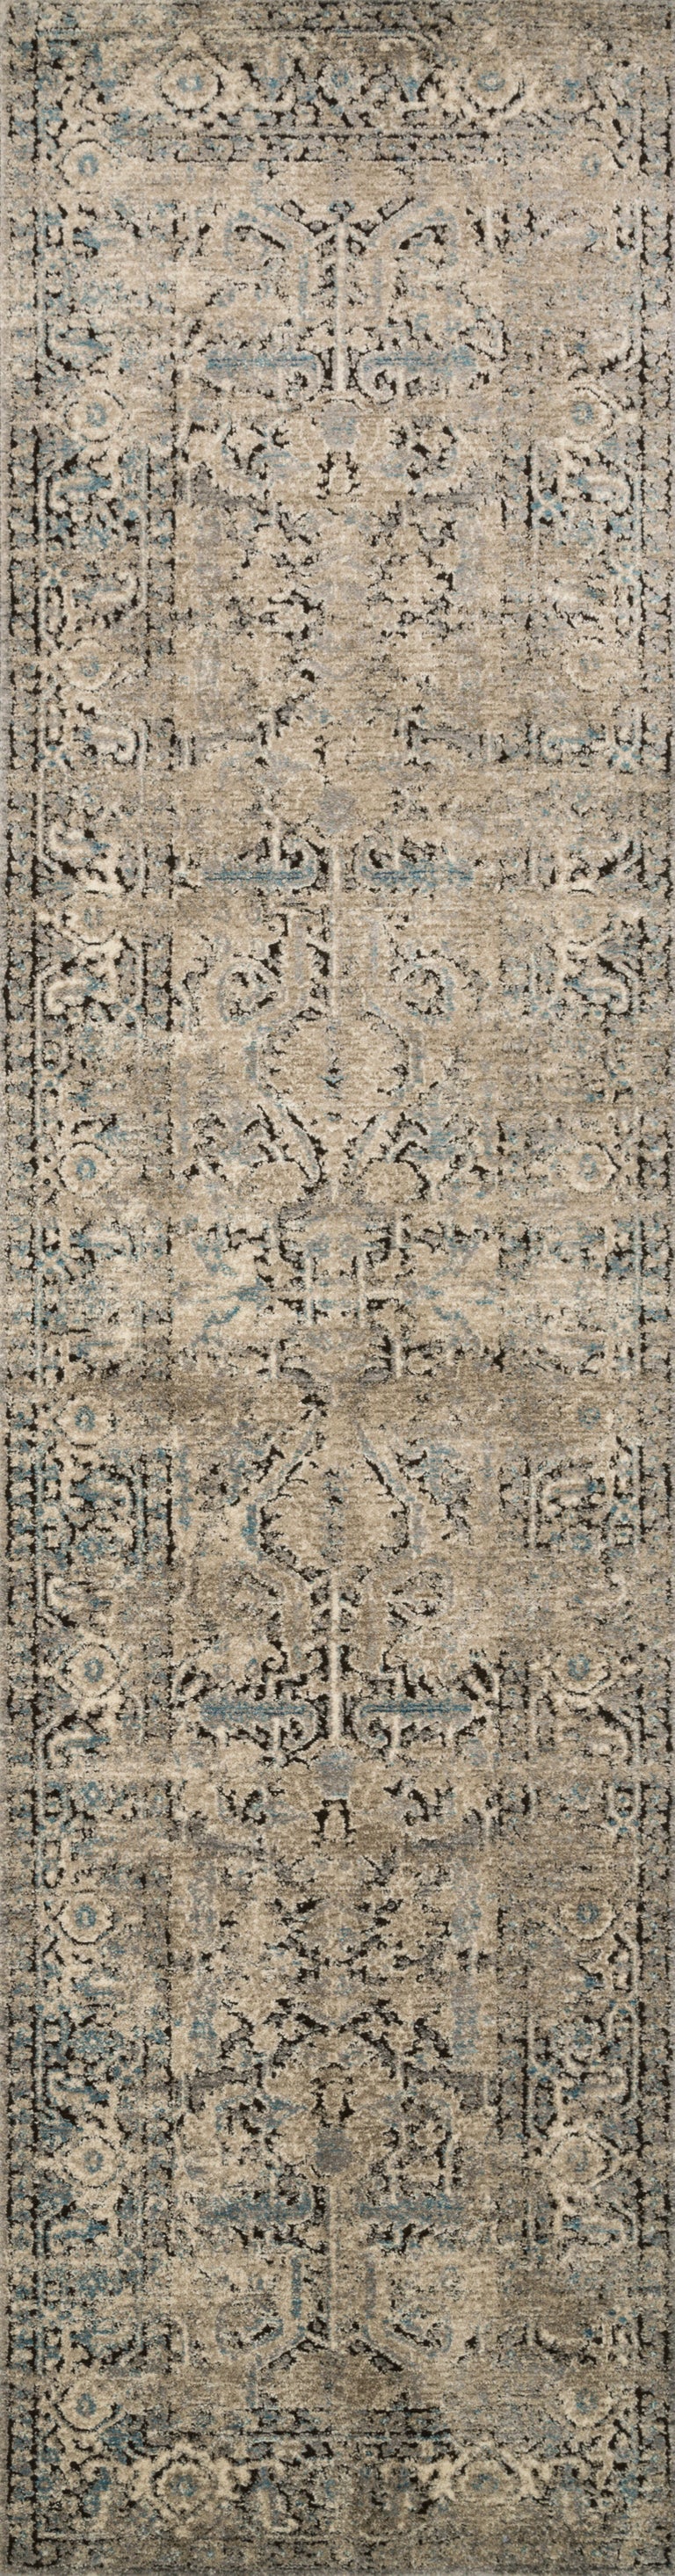 Loloi Rugs Millennium Collection Rug in Grey, Stone - 6'7" x 9'2"